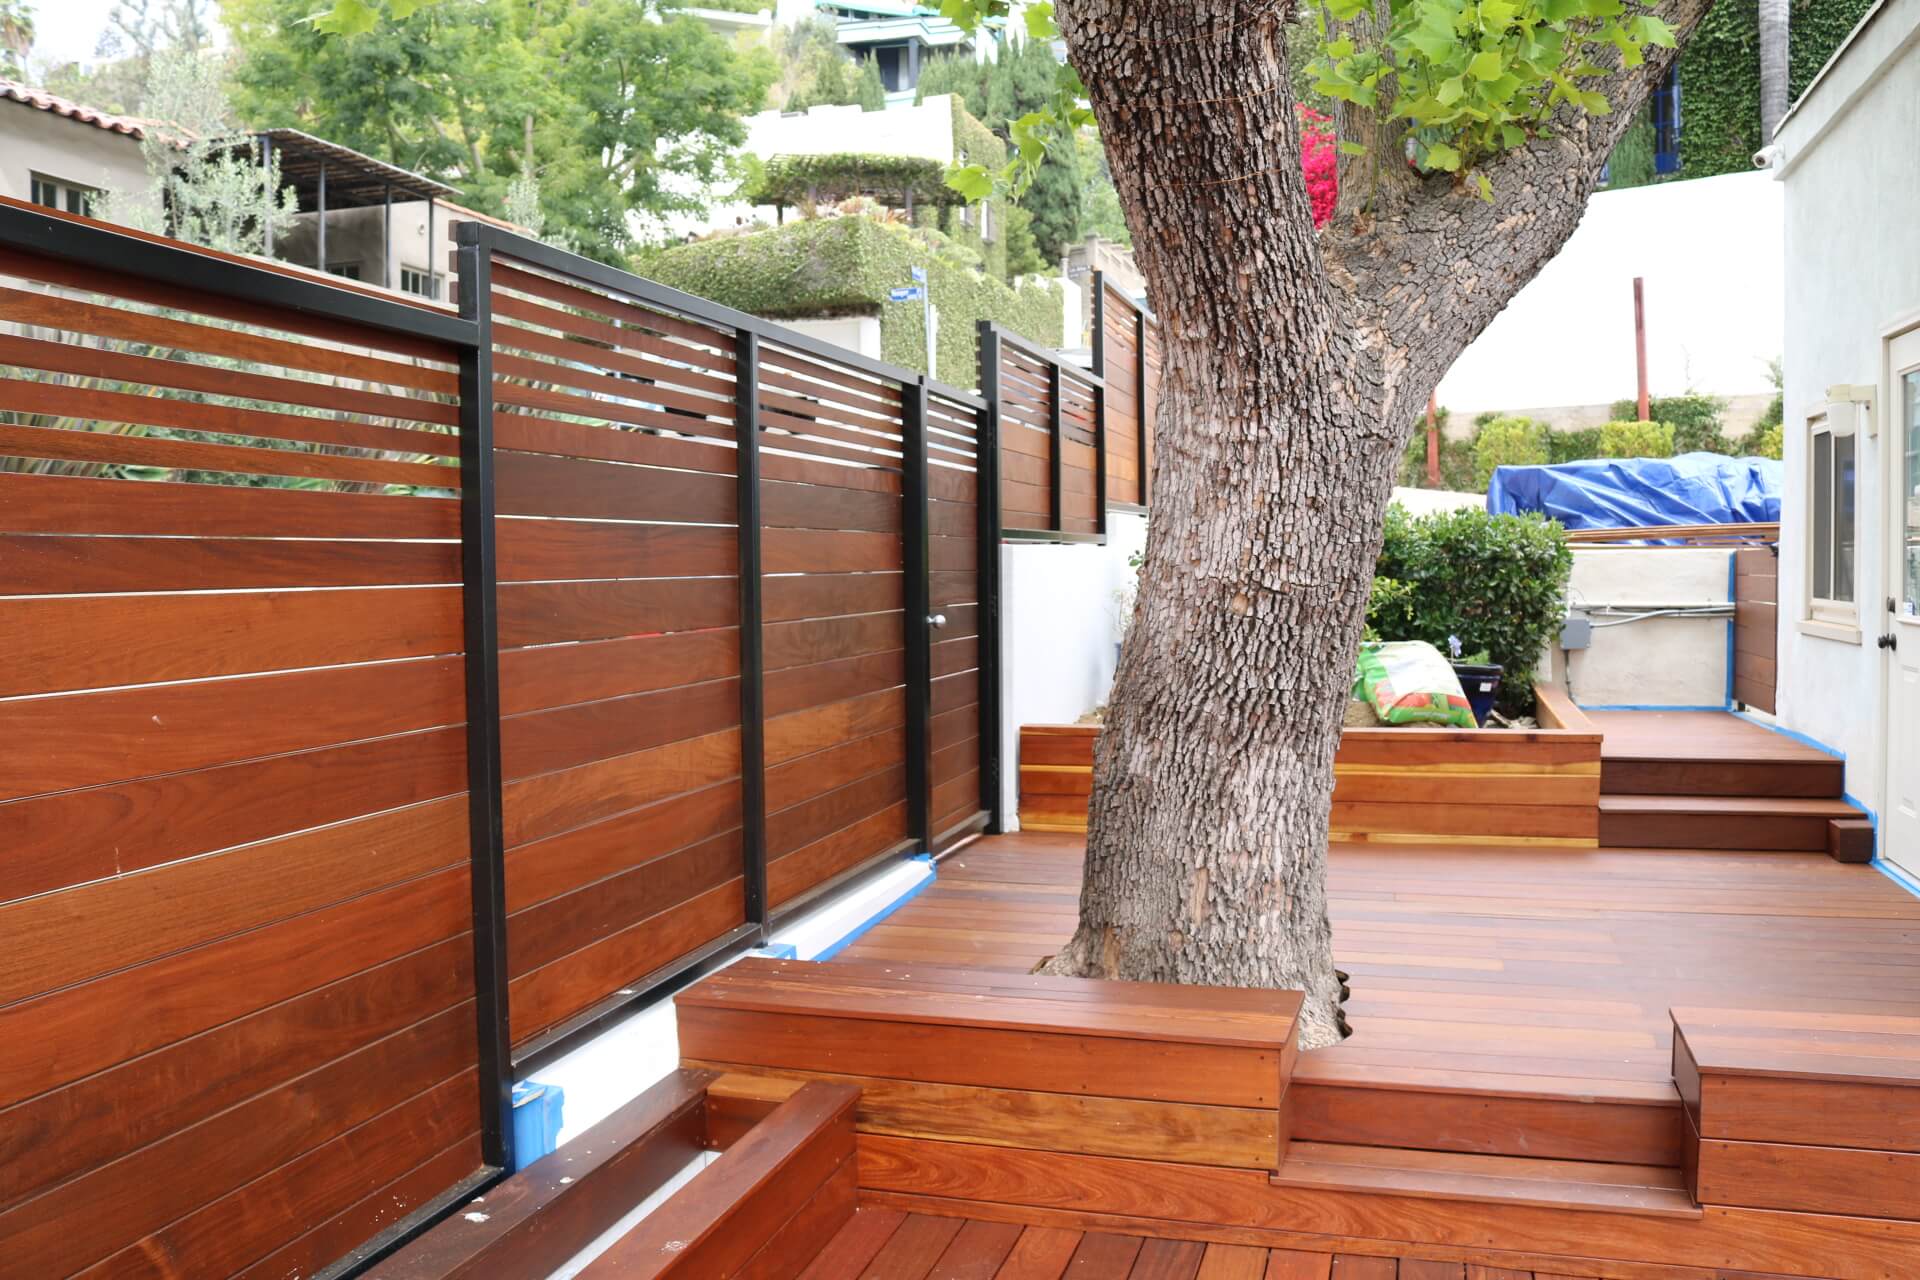 Shiny Lumber Deck Surrounded by Wooden Fence